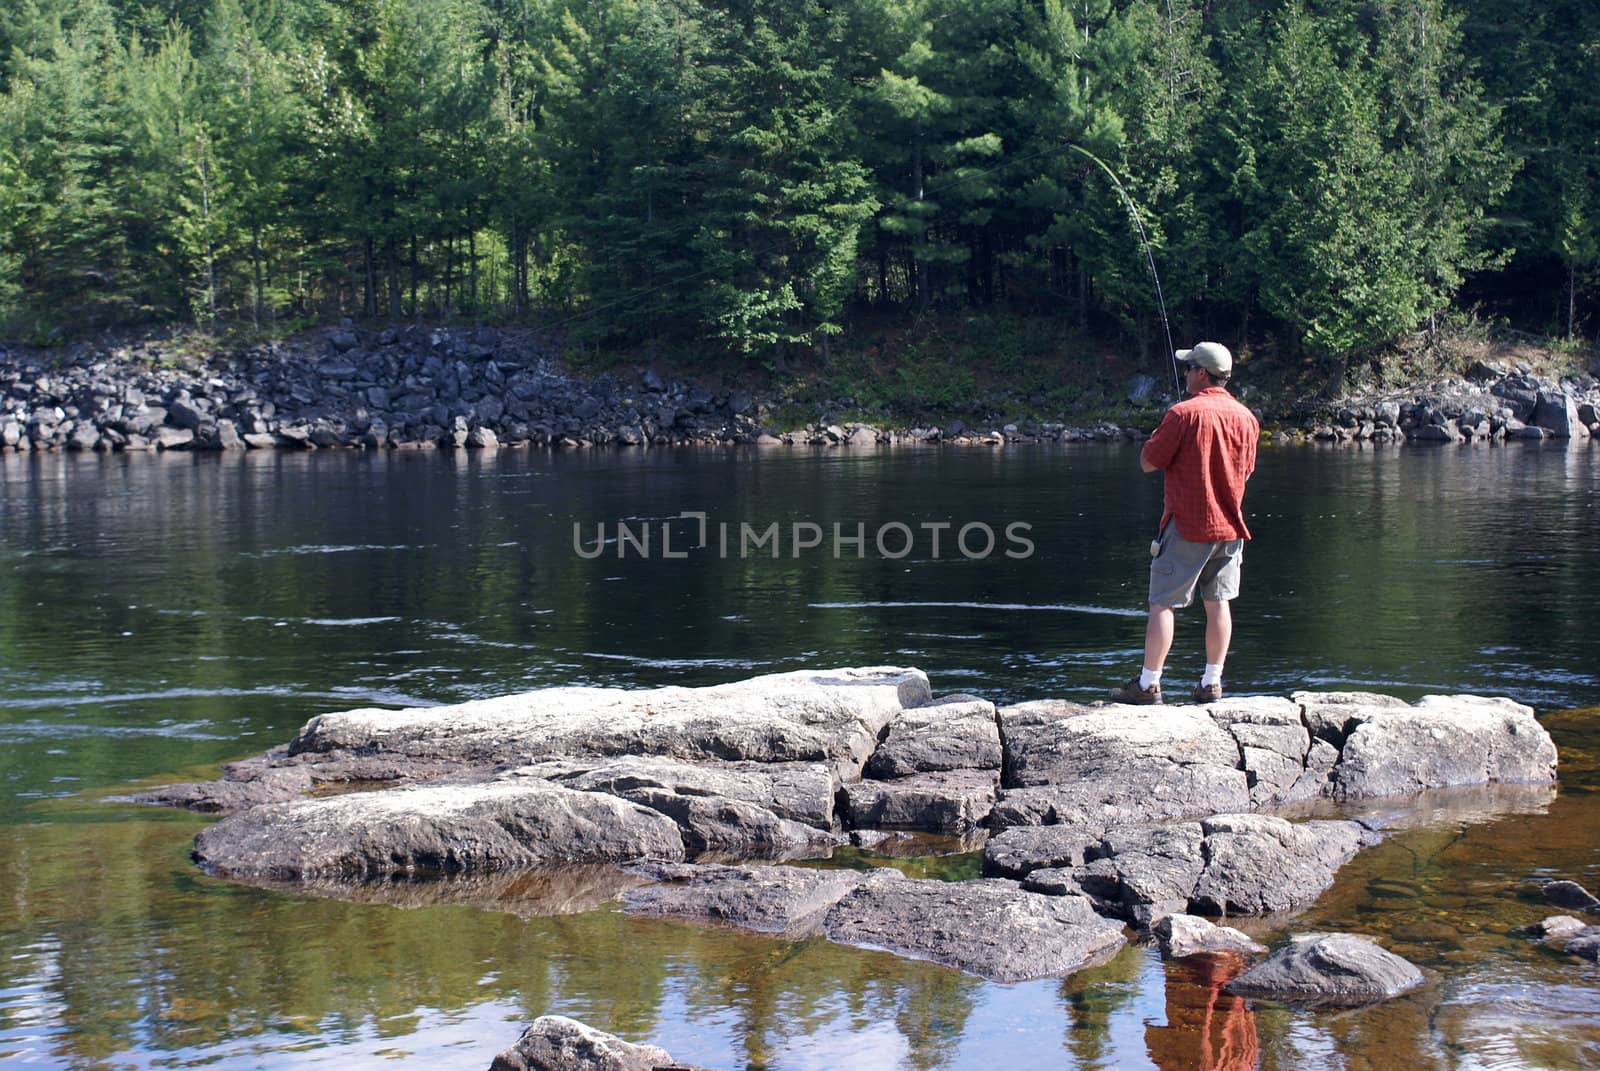 A fisherman stands on some rocks as he reels in his lure.